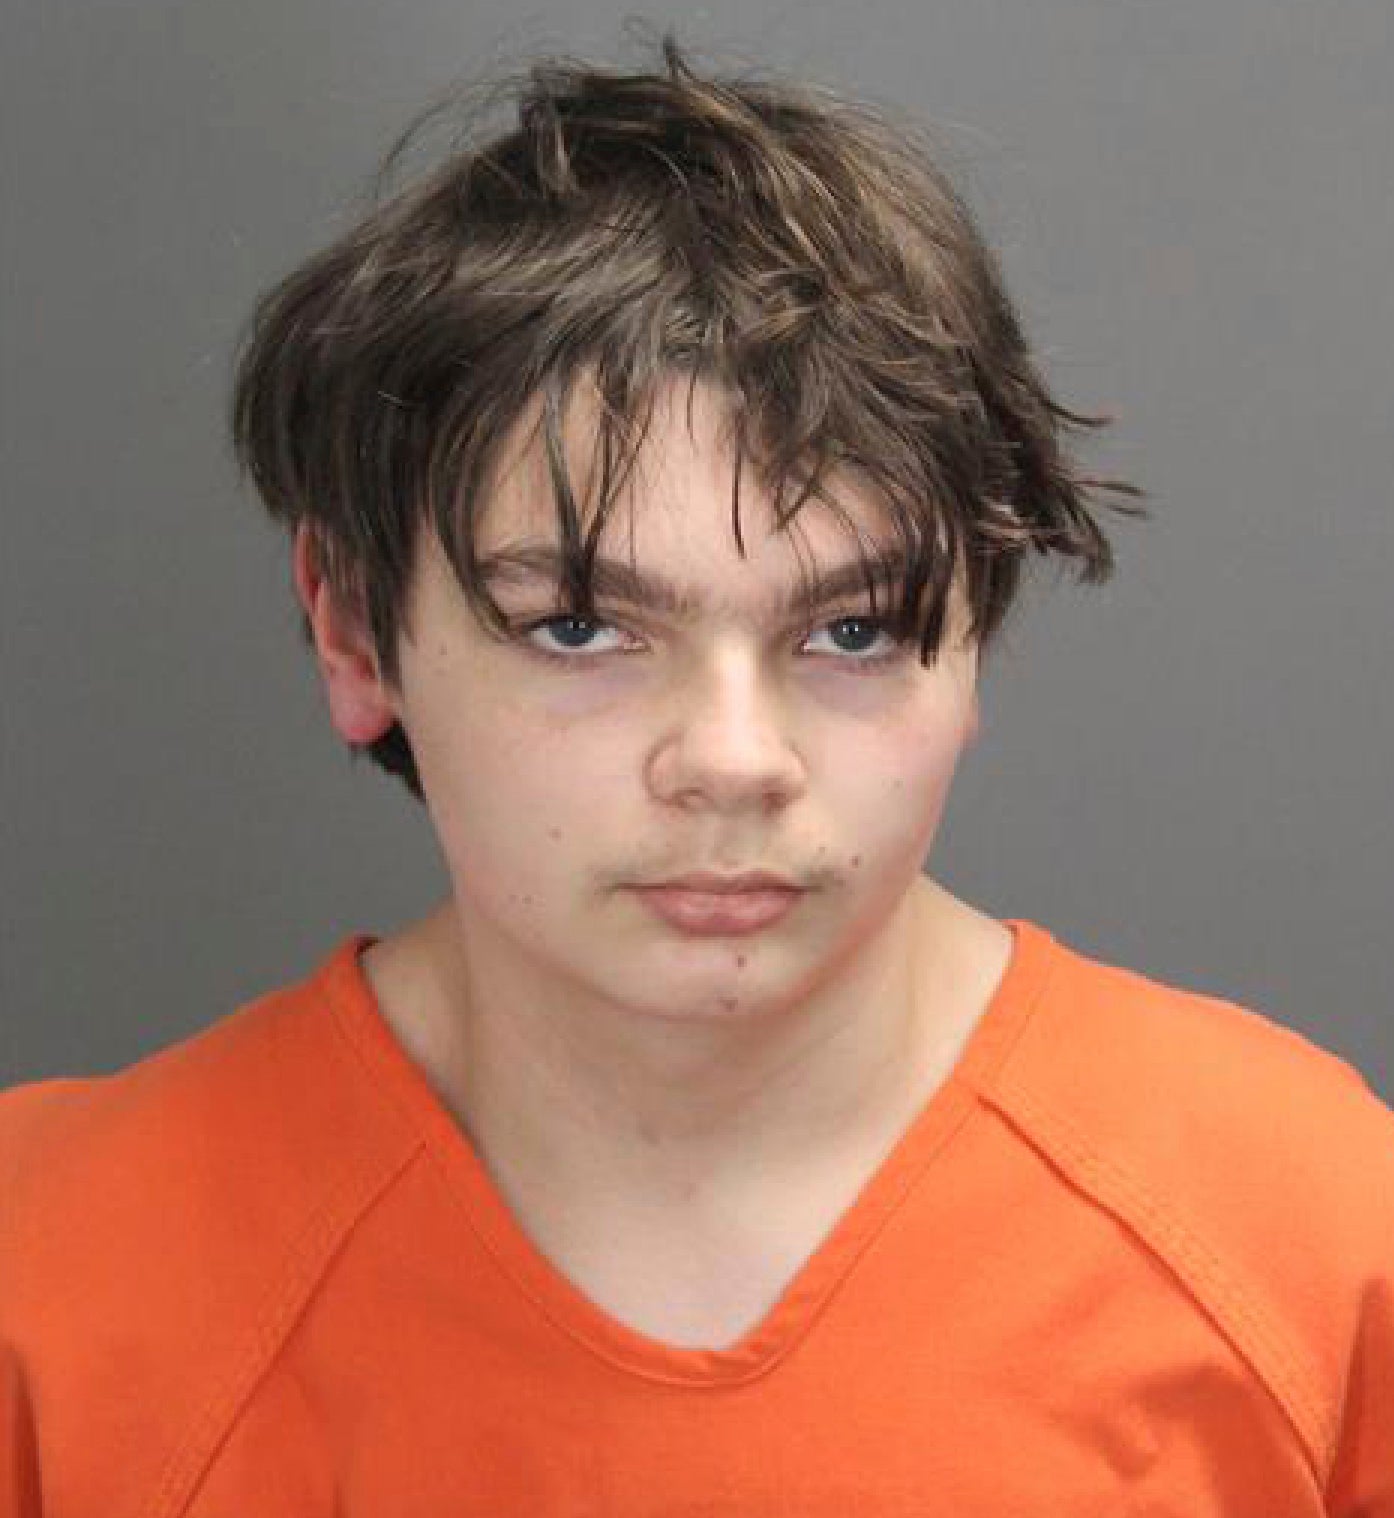 Ethan Crumbley, 15, is seen in his booking photo